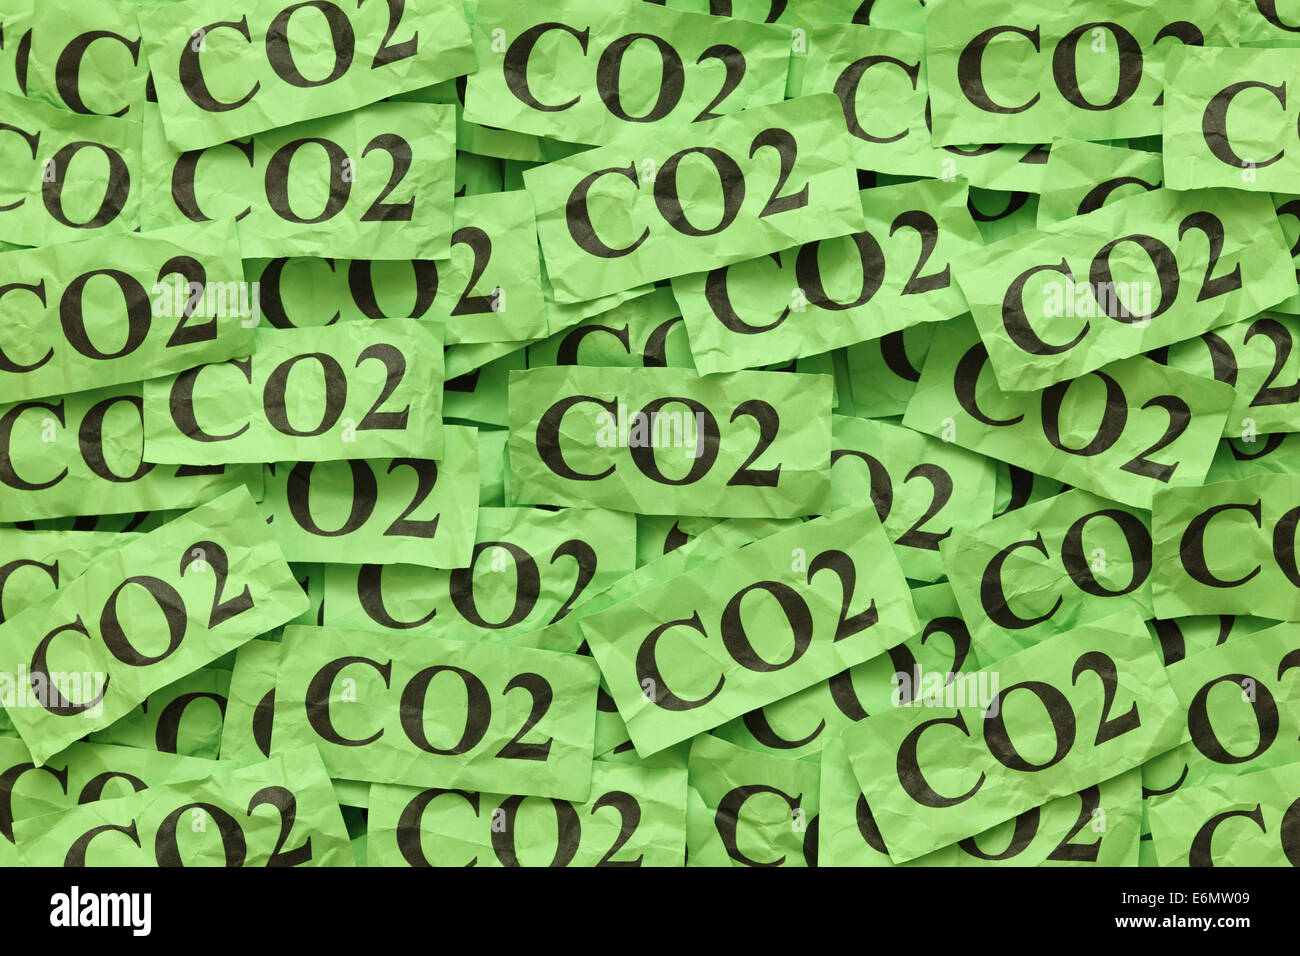 Pile of green paper notes with word 'CO2' (Carbon Dioxide). Stock Photo